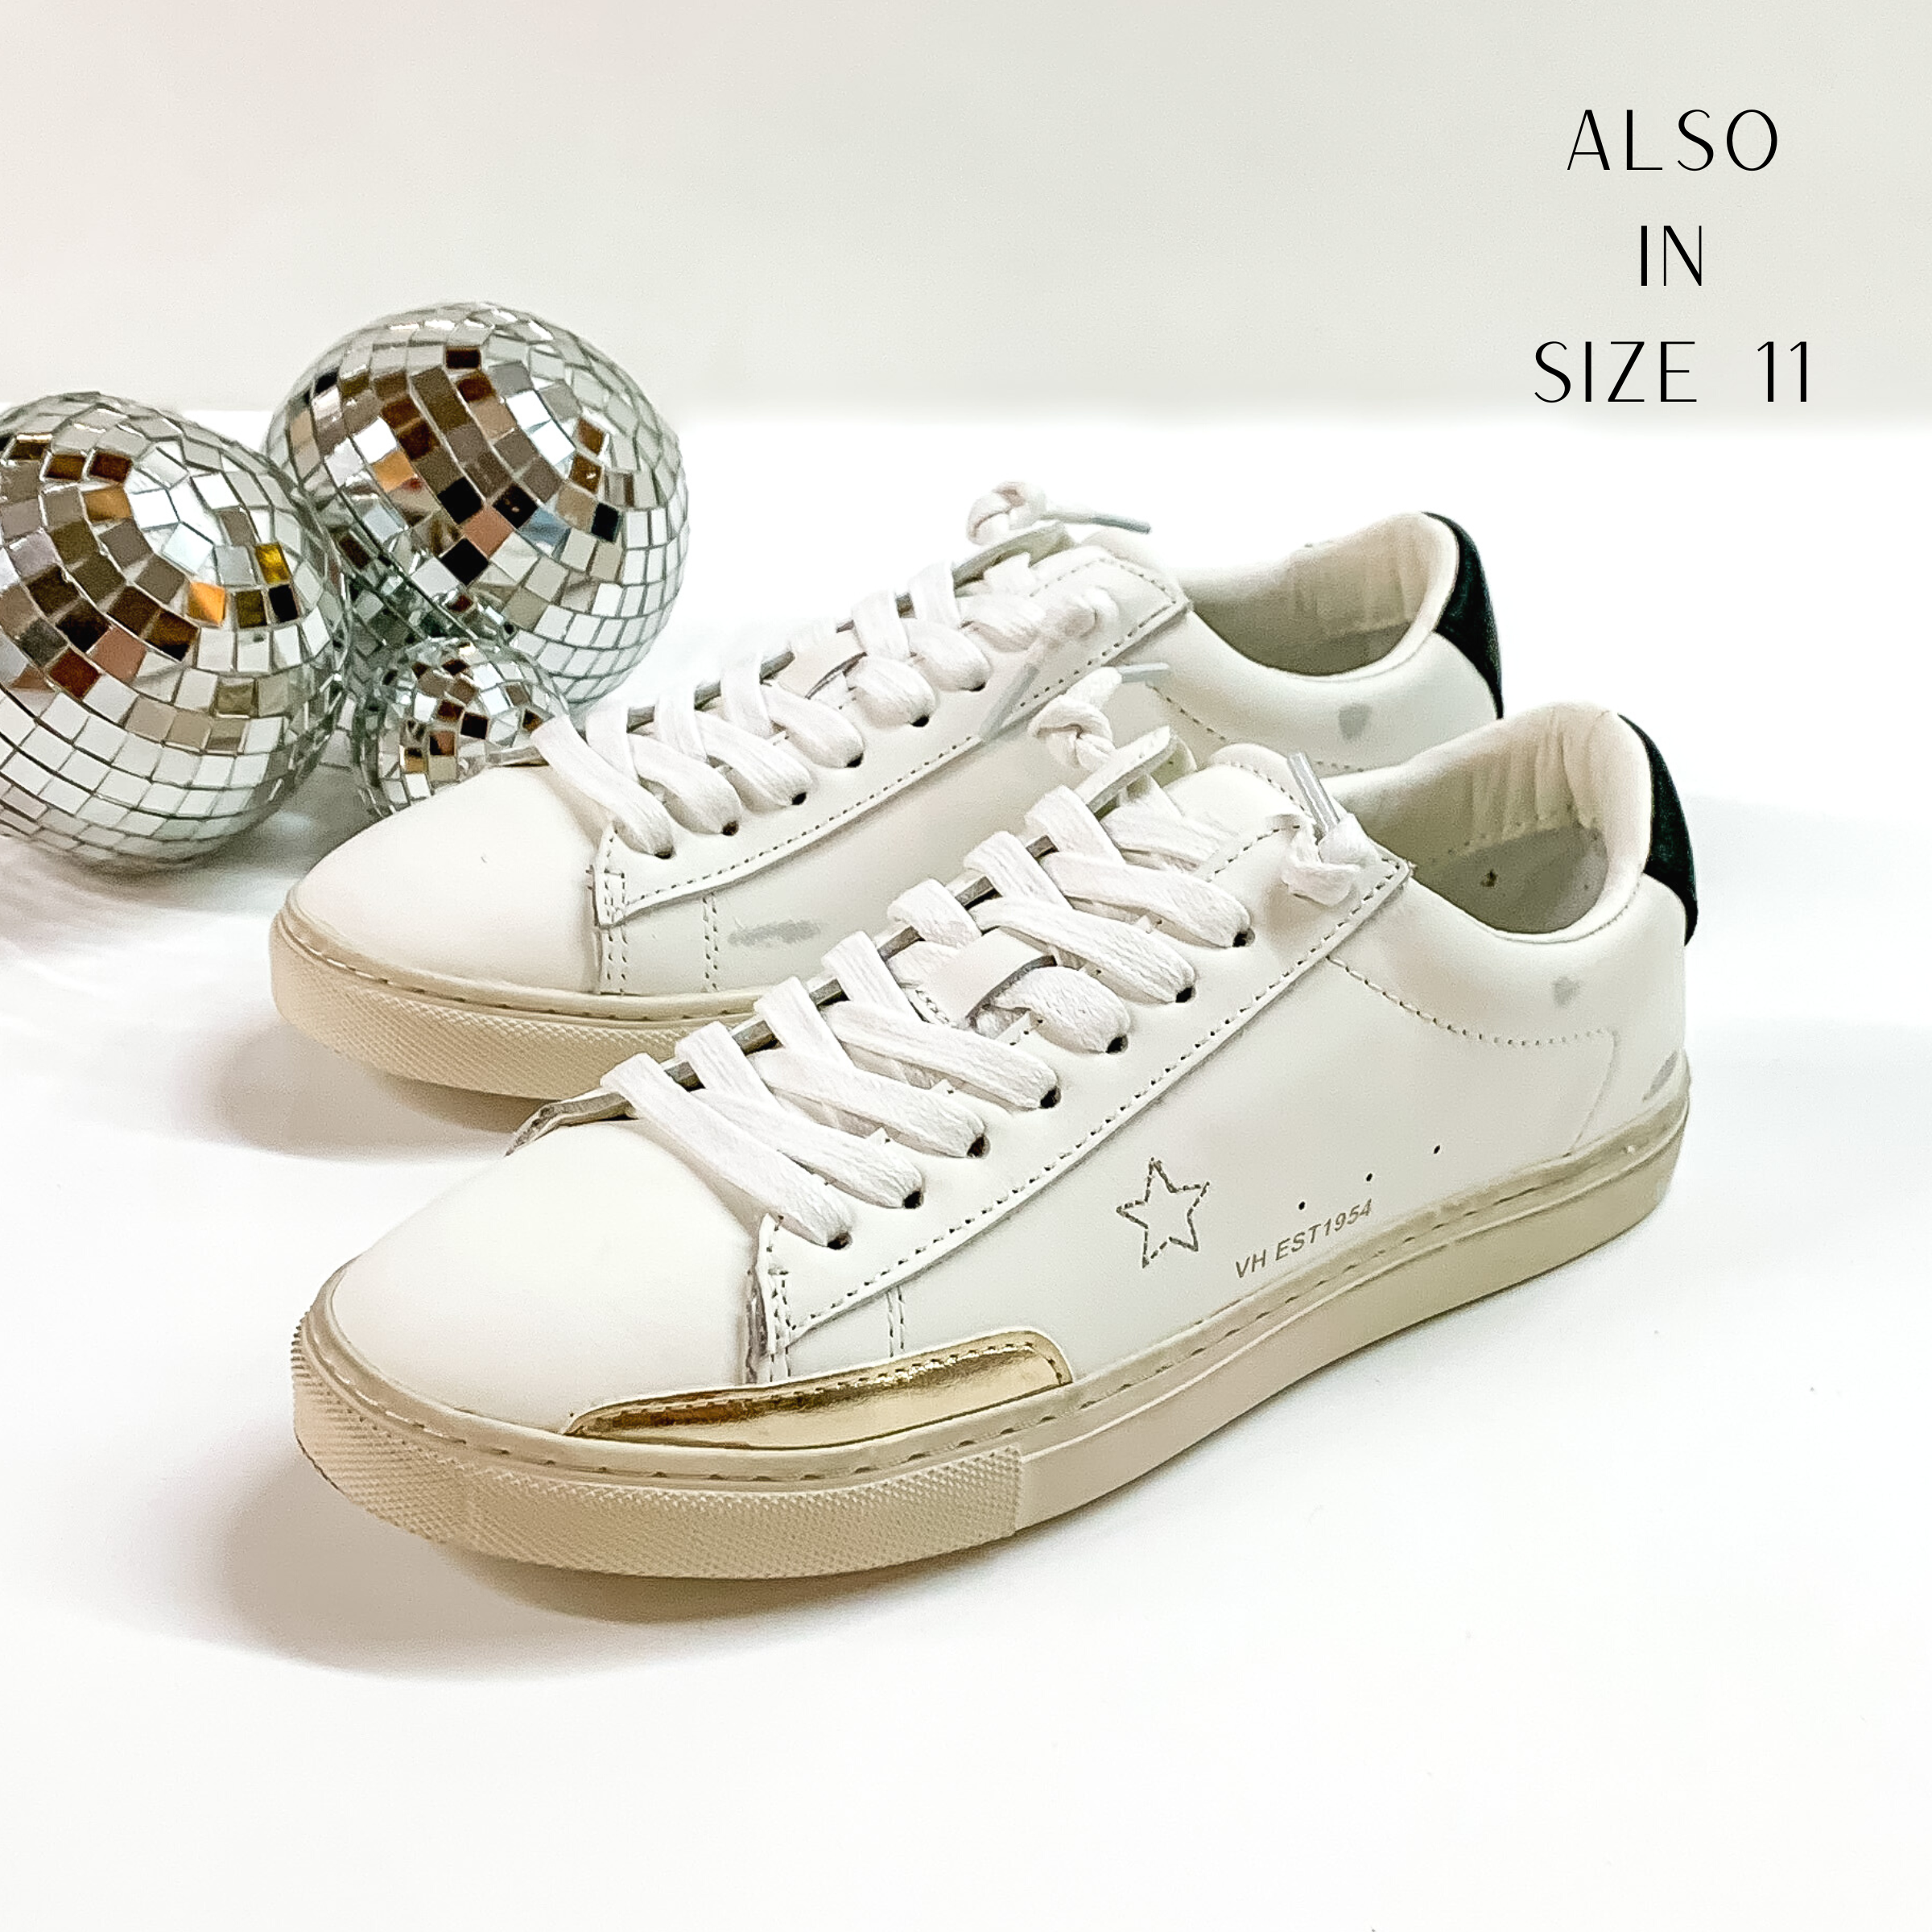 White tennis shoes and shoelaces. The tennis shoes also have a stitched star on the side, a black heel patch, and a gold outline on the side of the toe part. These shoes are pictured on a white background with disco balls behind them. 